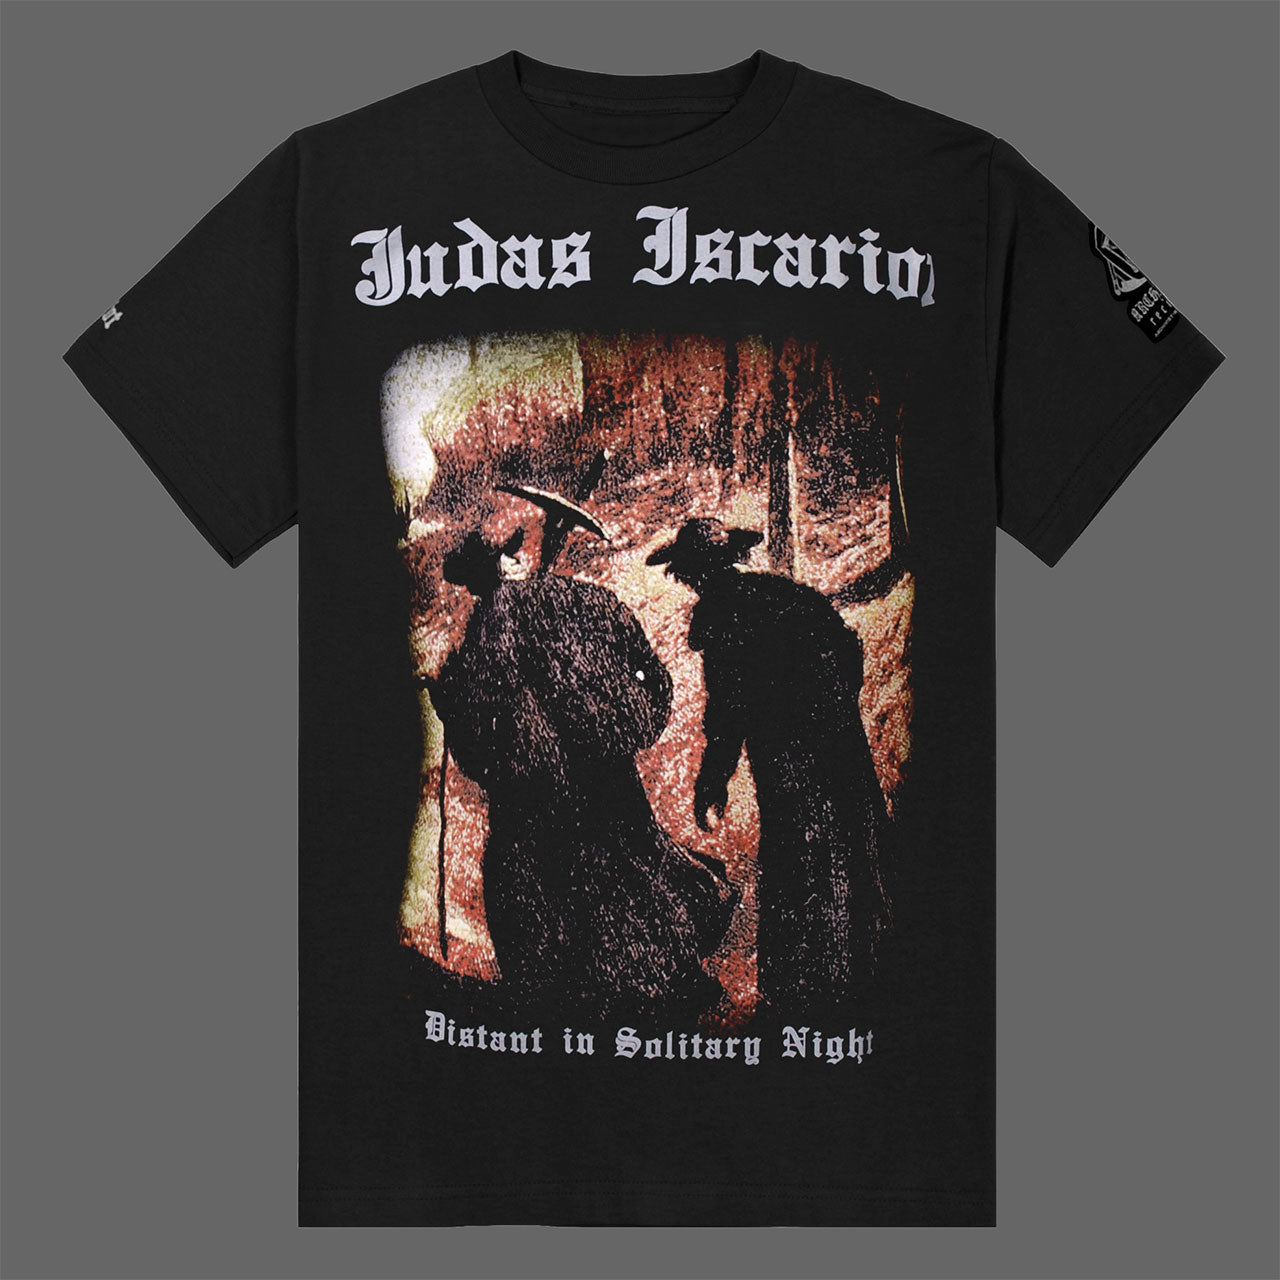 Judas Iscariot - Distant in Solitary Night (T-Shirt)